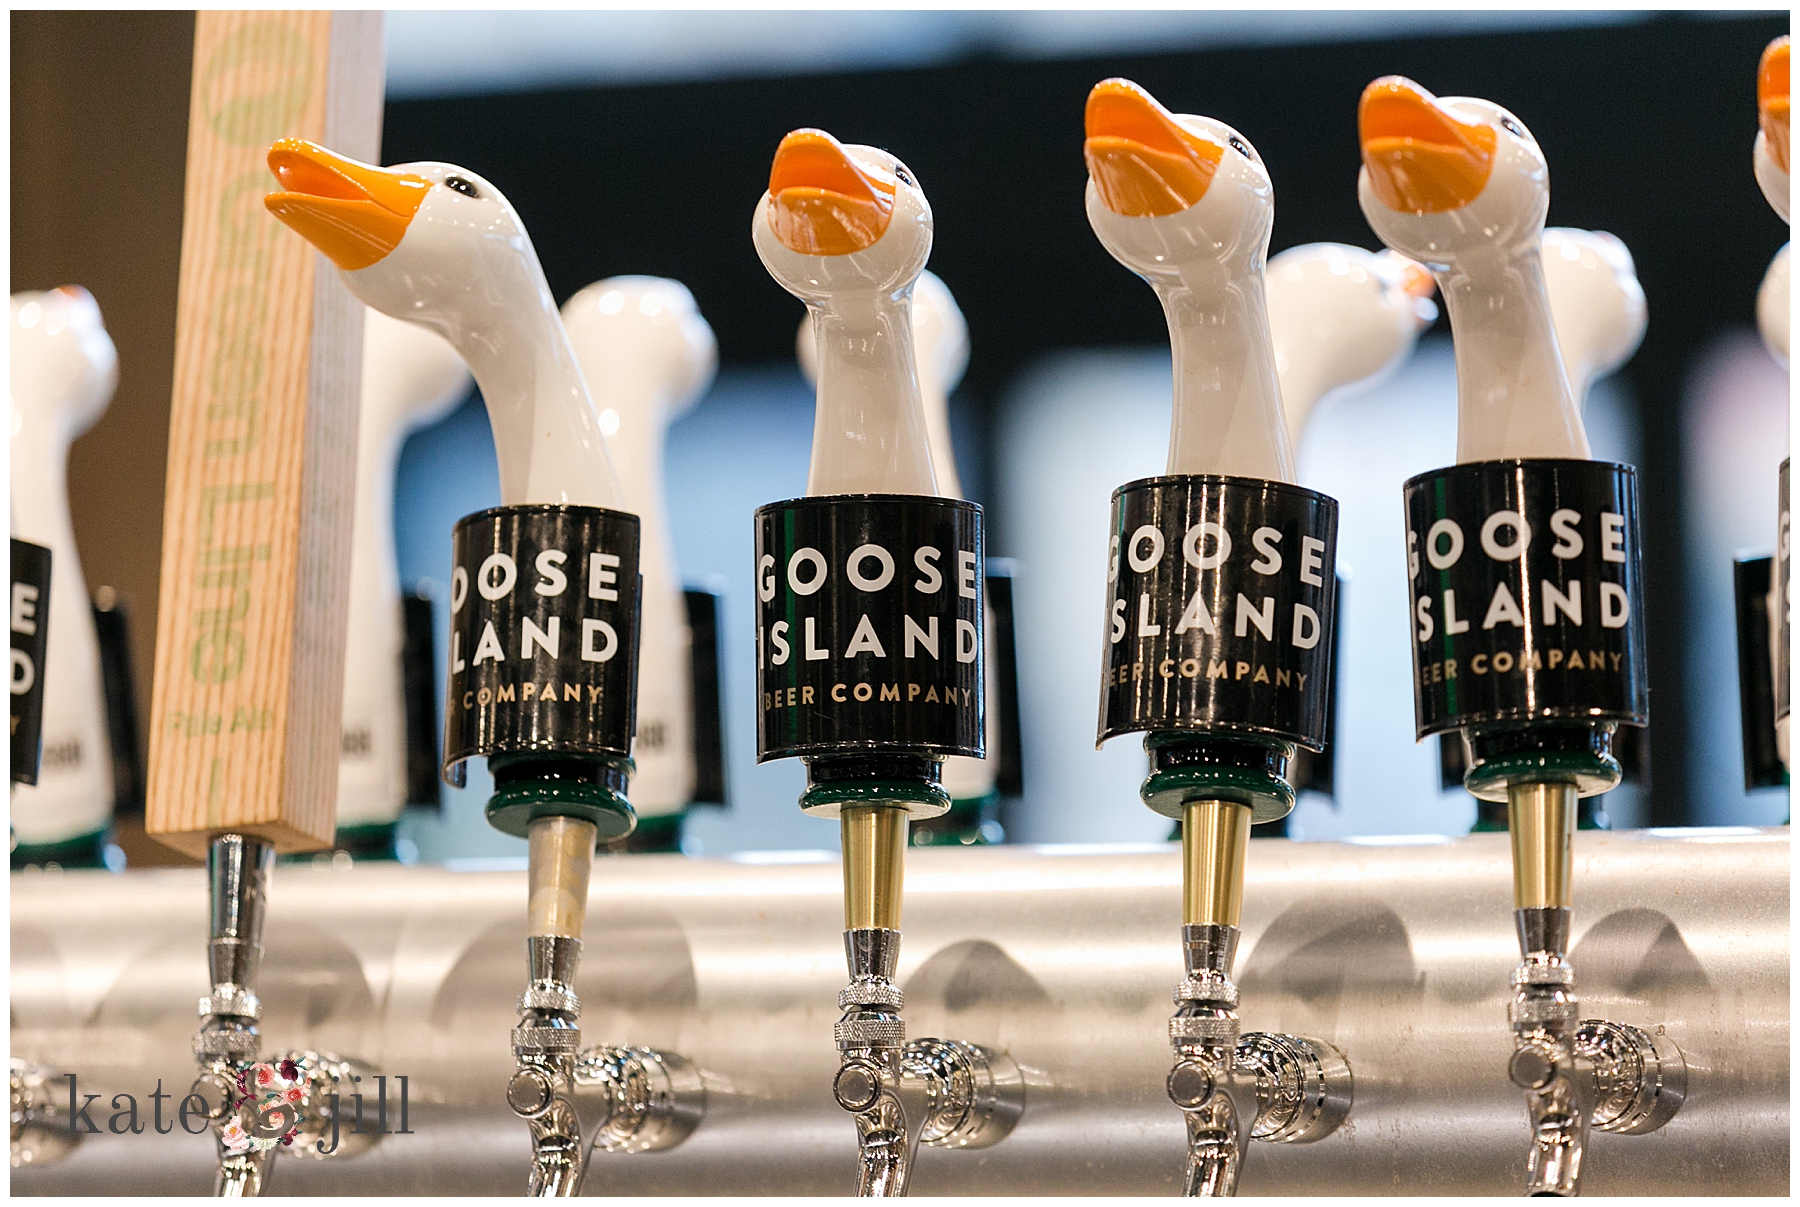 Goose Island Brewhouse taps